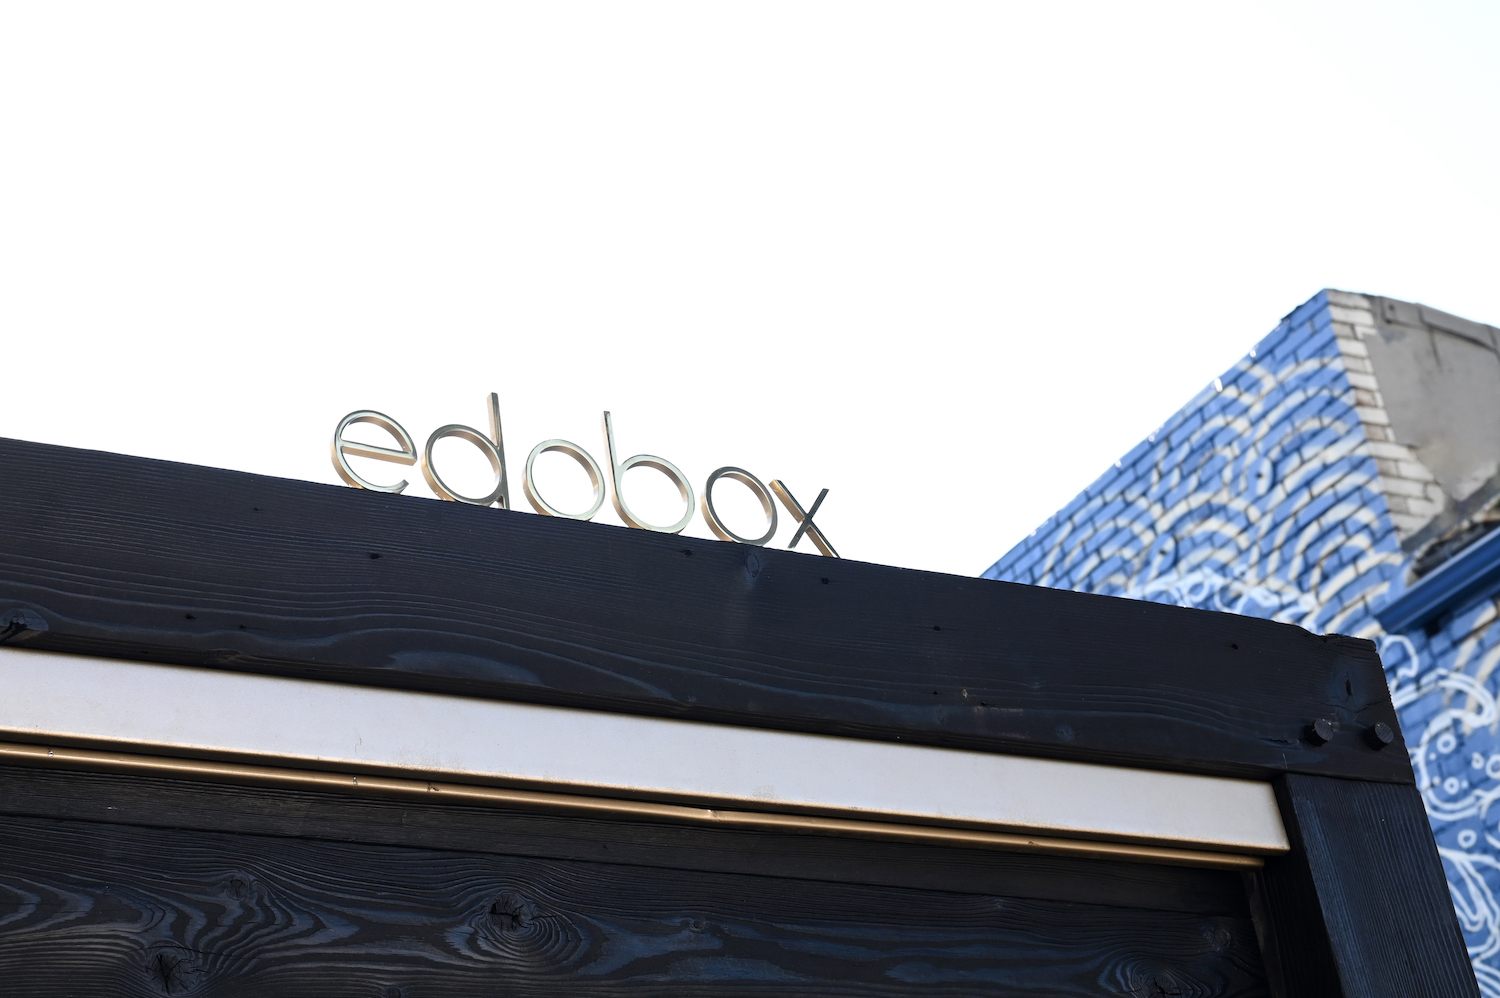 Edobox is the first but not the last fast-casual project from Chef Makoto Okuwa, best known for full-service restaurants in Miami, Mexico City, Panama City, Panama and São Paolo, Brazil.